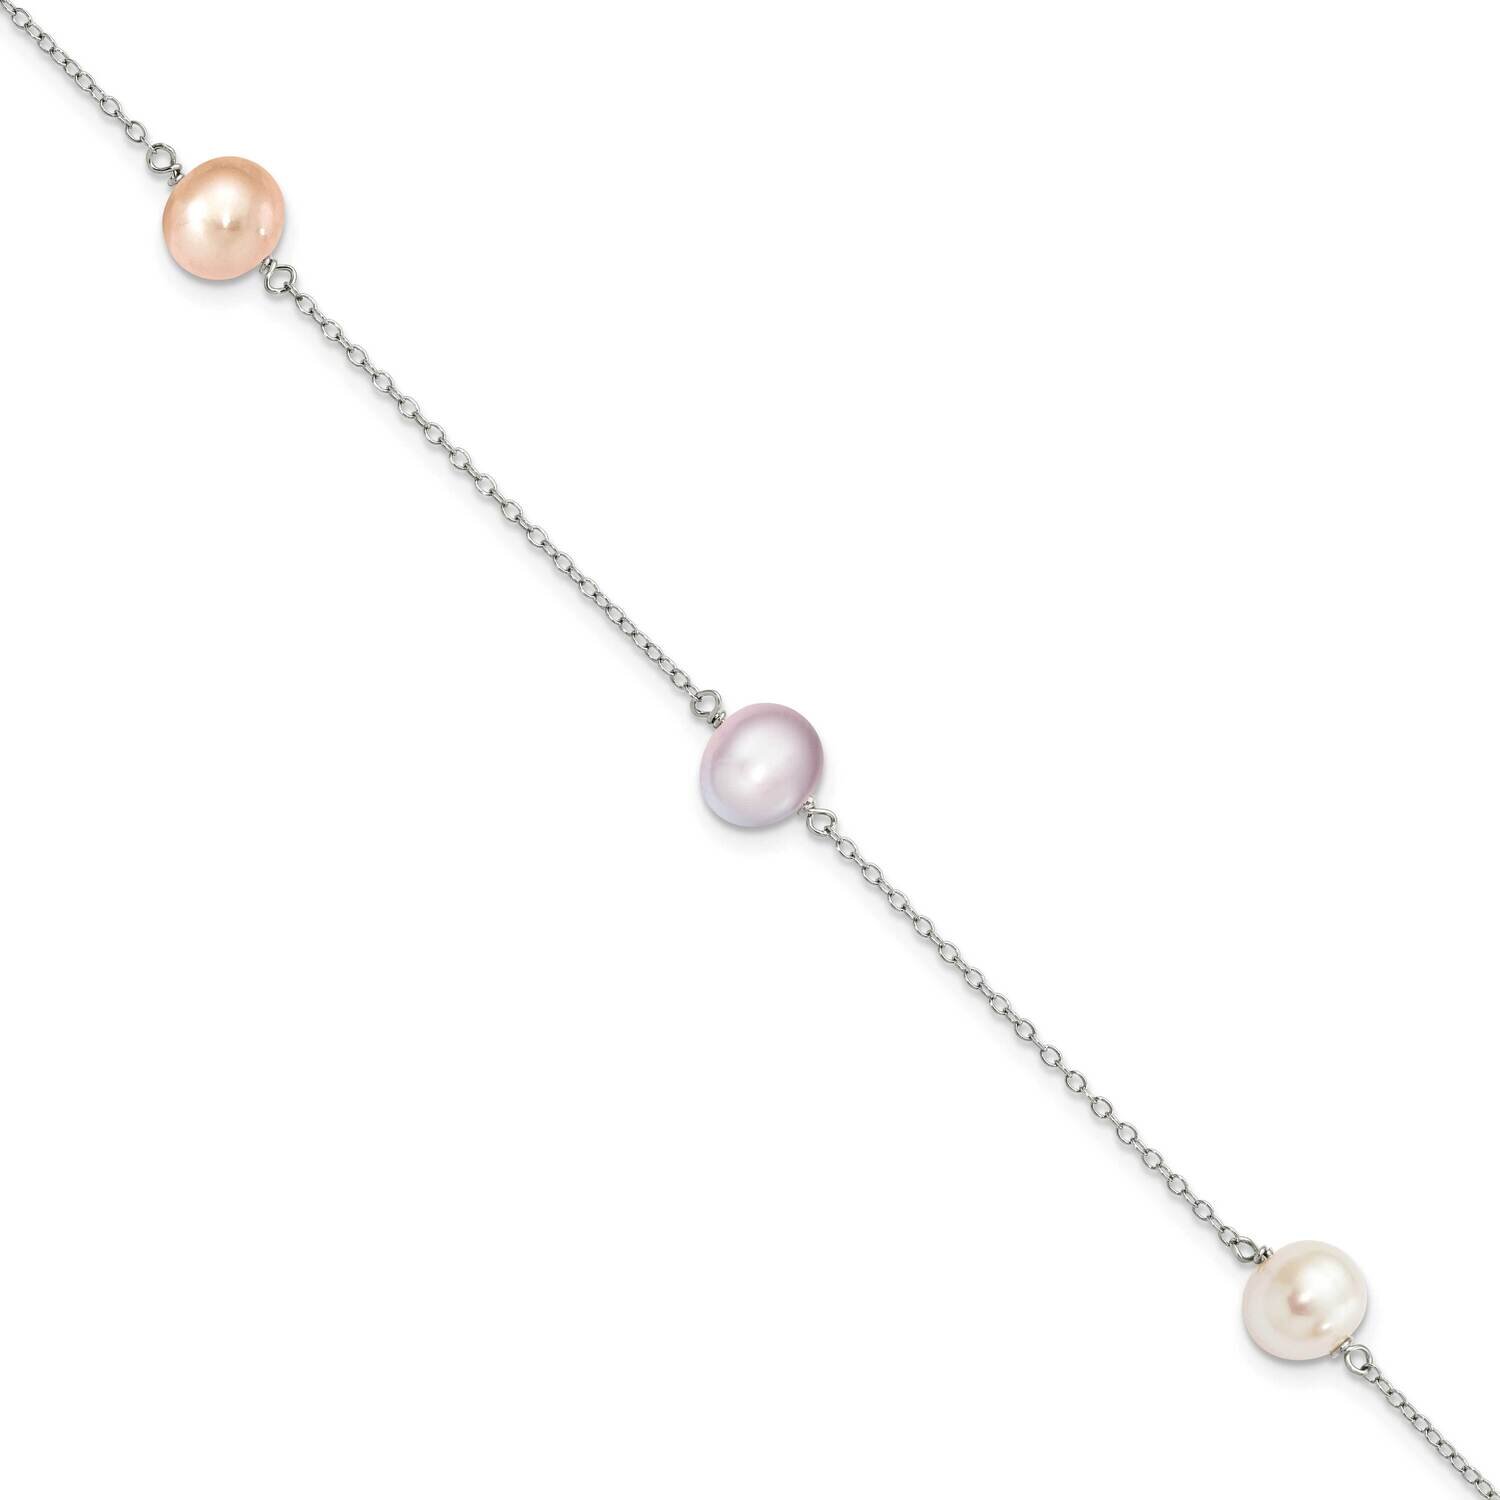 3-Stat 7-8M White/Pink/Pur Semi-Round Cultured Freshwater Pearl Bracelet 7.5 Inch Sterling Silver Rhodium-plated QH5419-7.5